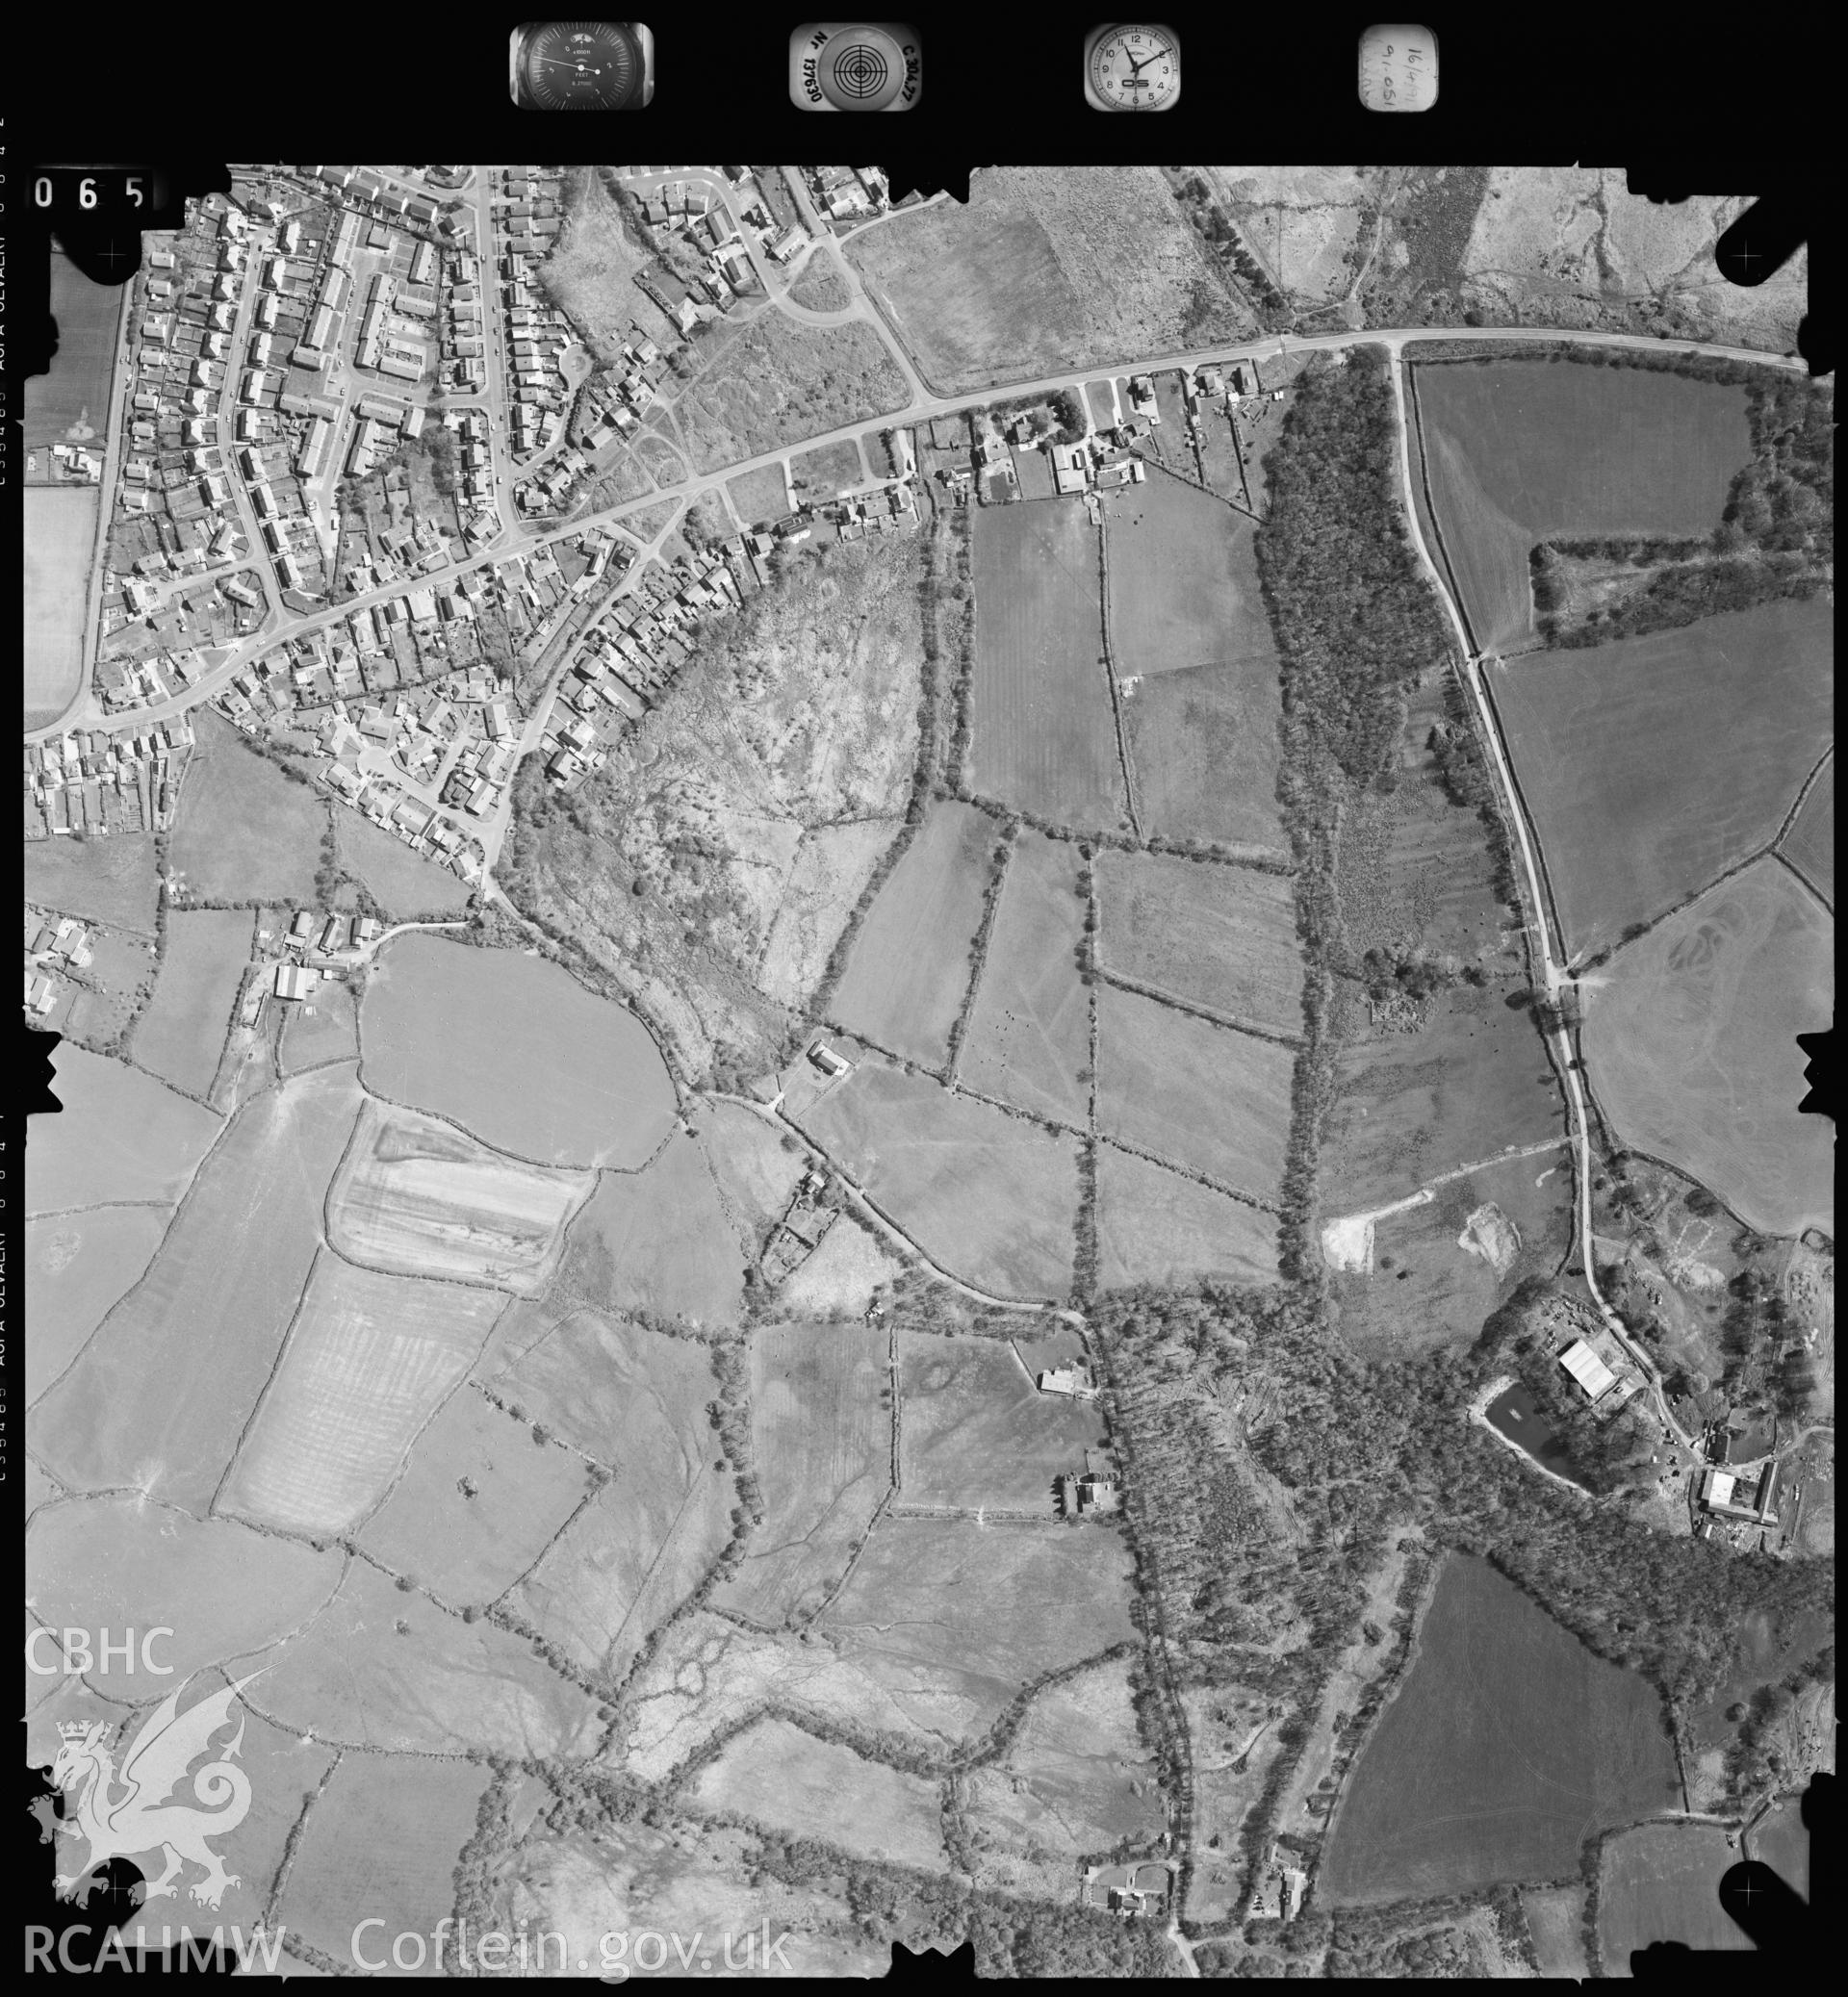 Digitized copy of an aerial photograph showing the area around Three Crosses on the Gower, taken by Ordnance Survey, 1991.